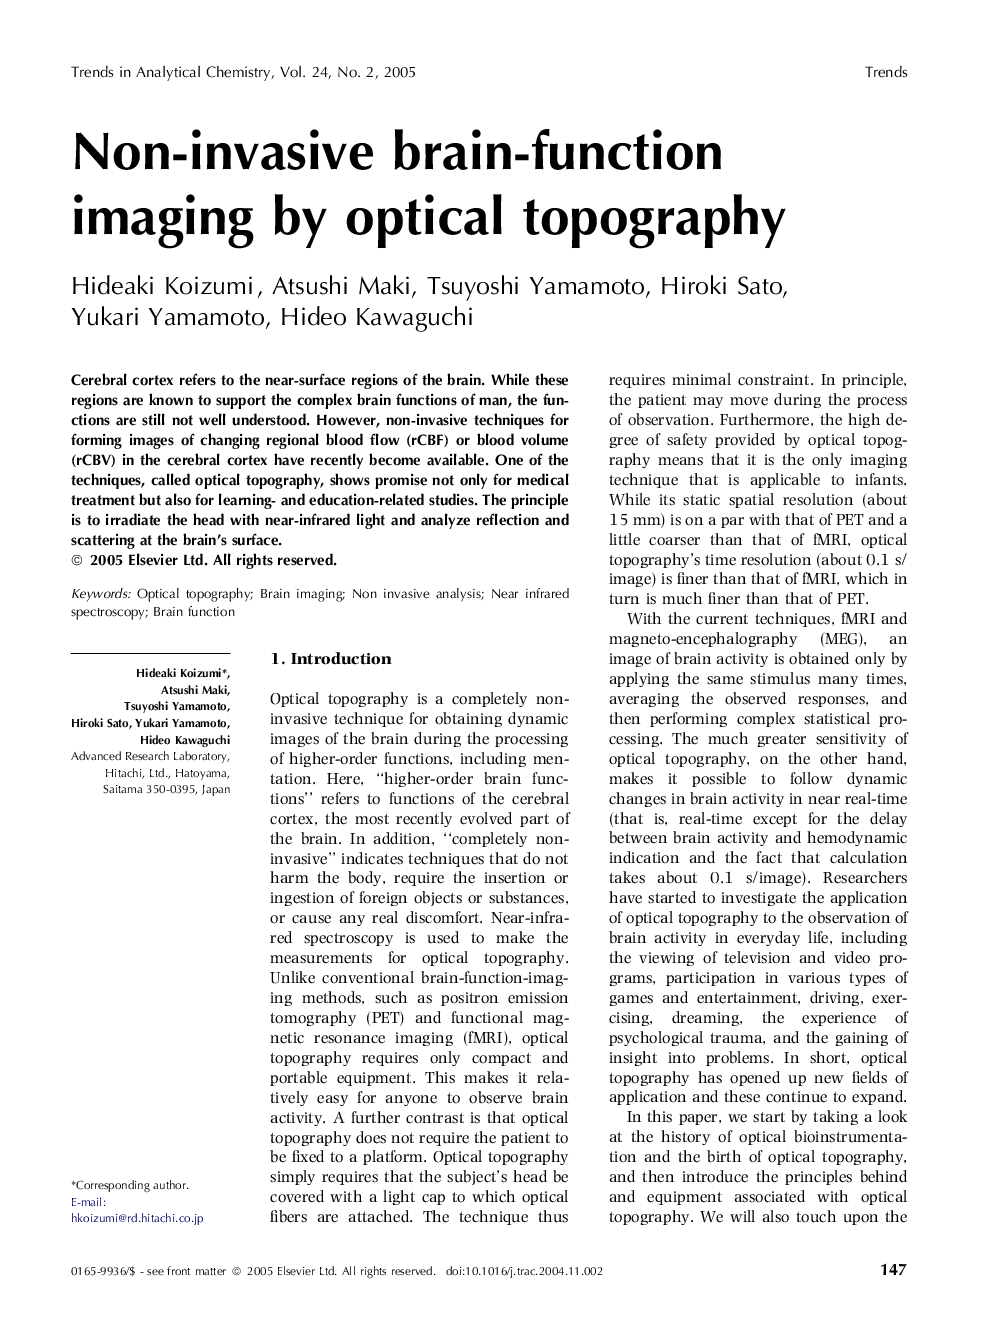 Non-invasive brain-function imaging by optical topography